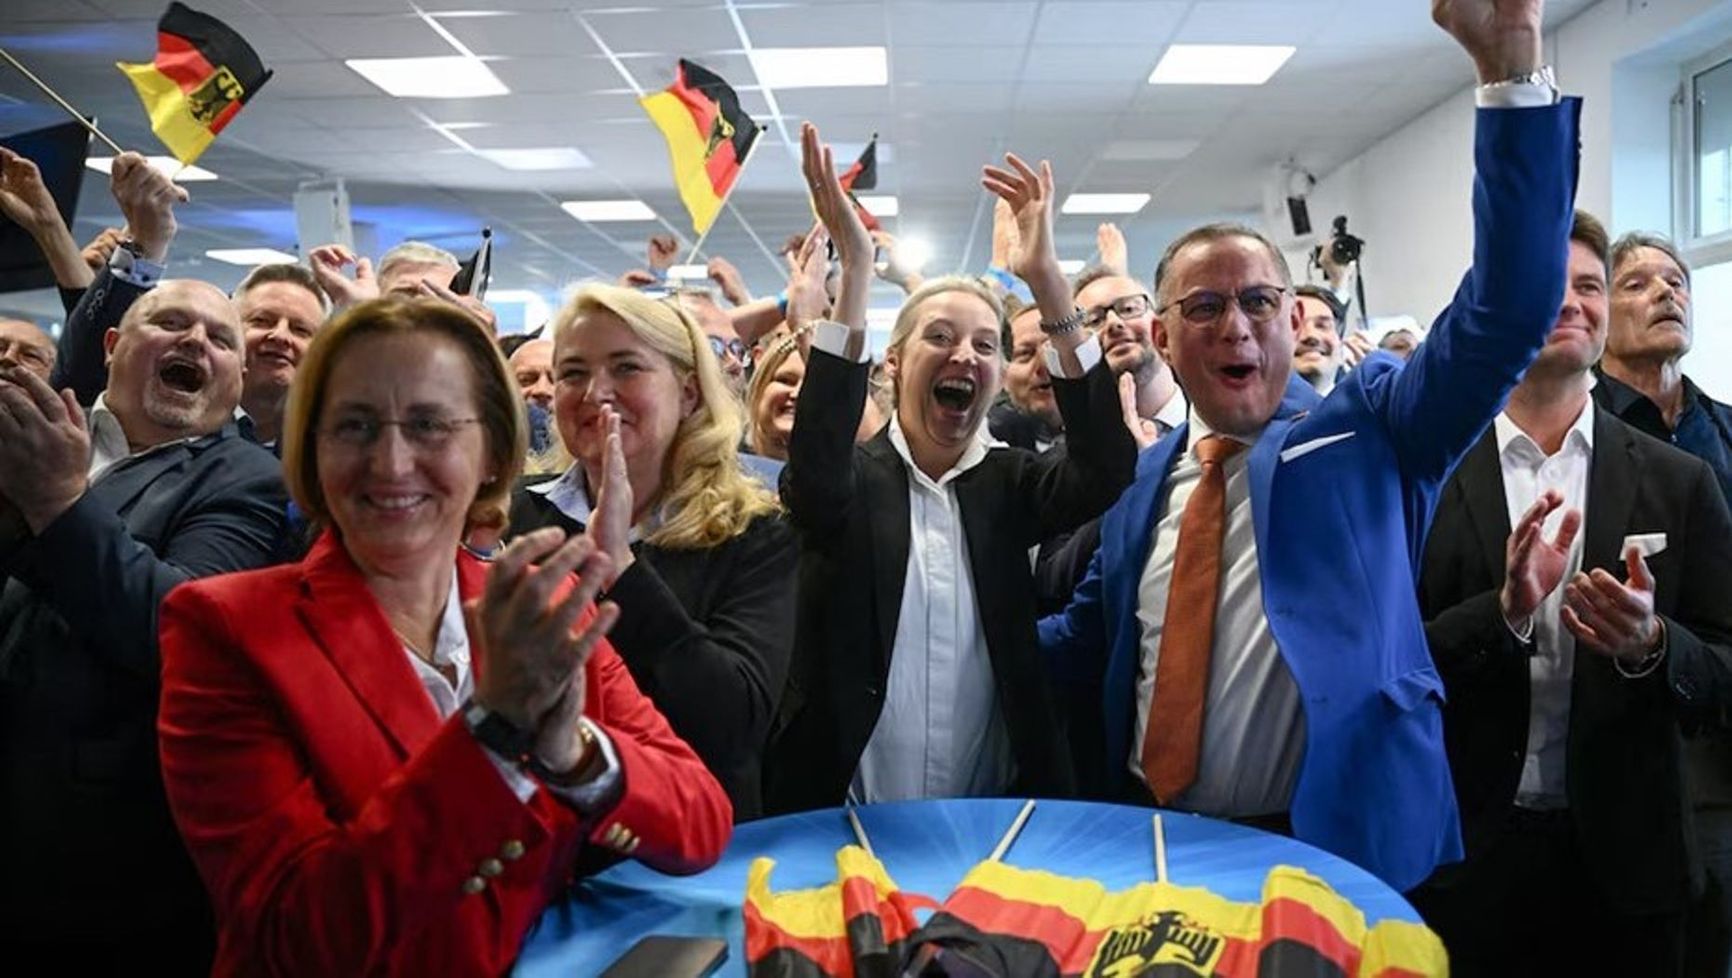 Alternative for Germany members Beatrix von Storch, Alice Weidel, and Tino Chrupalla after the European Parliament election